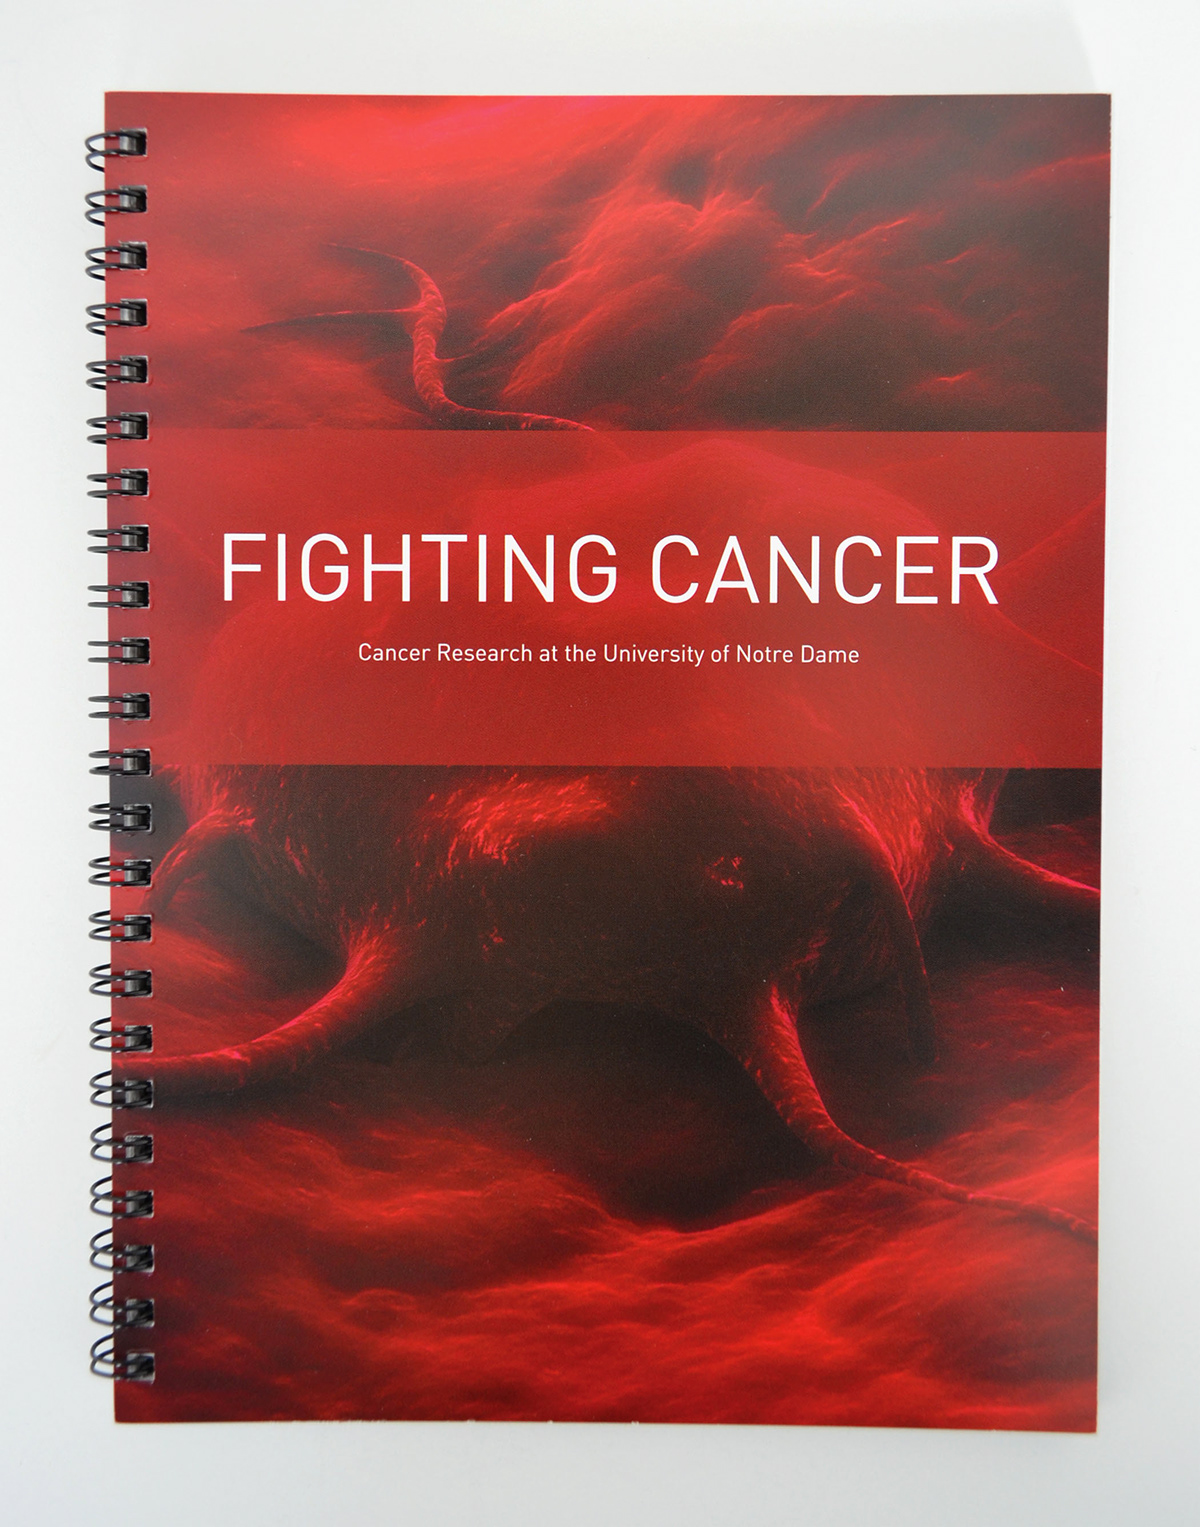 notre dame College of Science cancer research book Booklet red